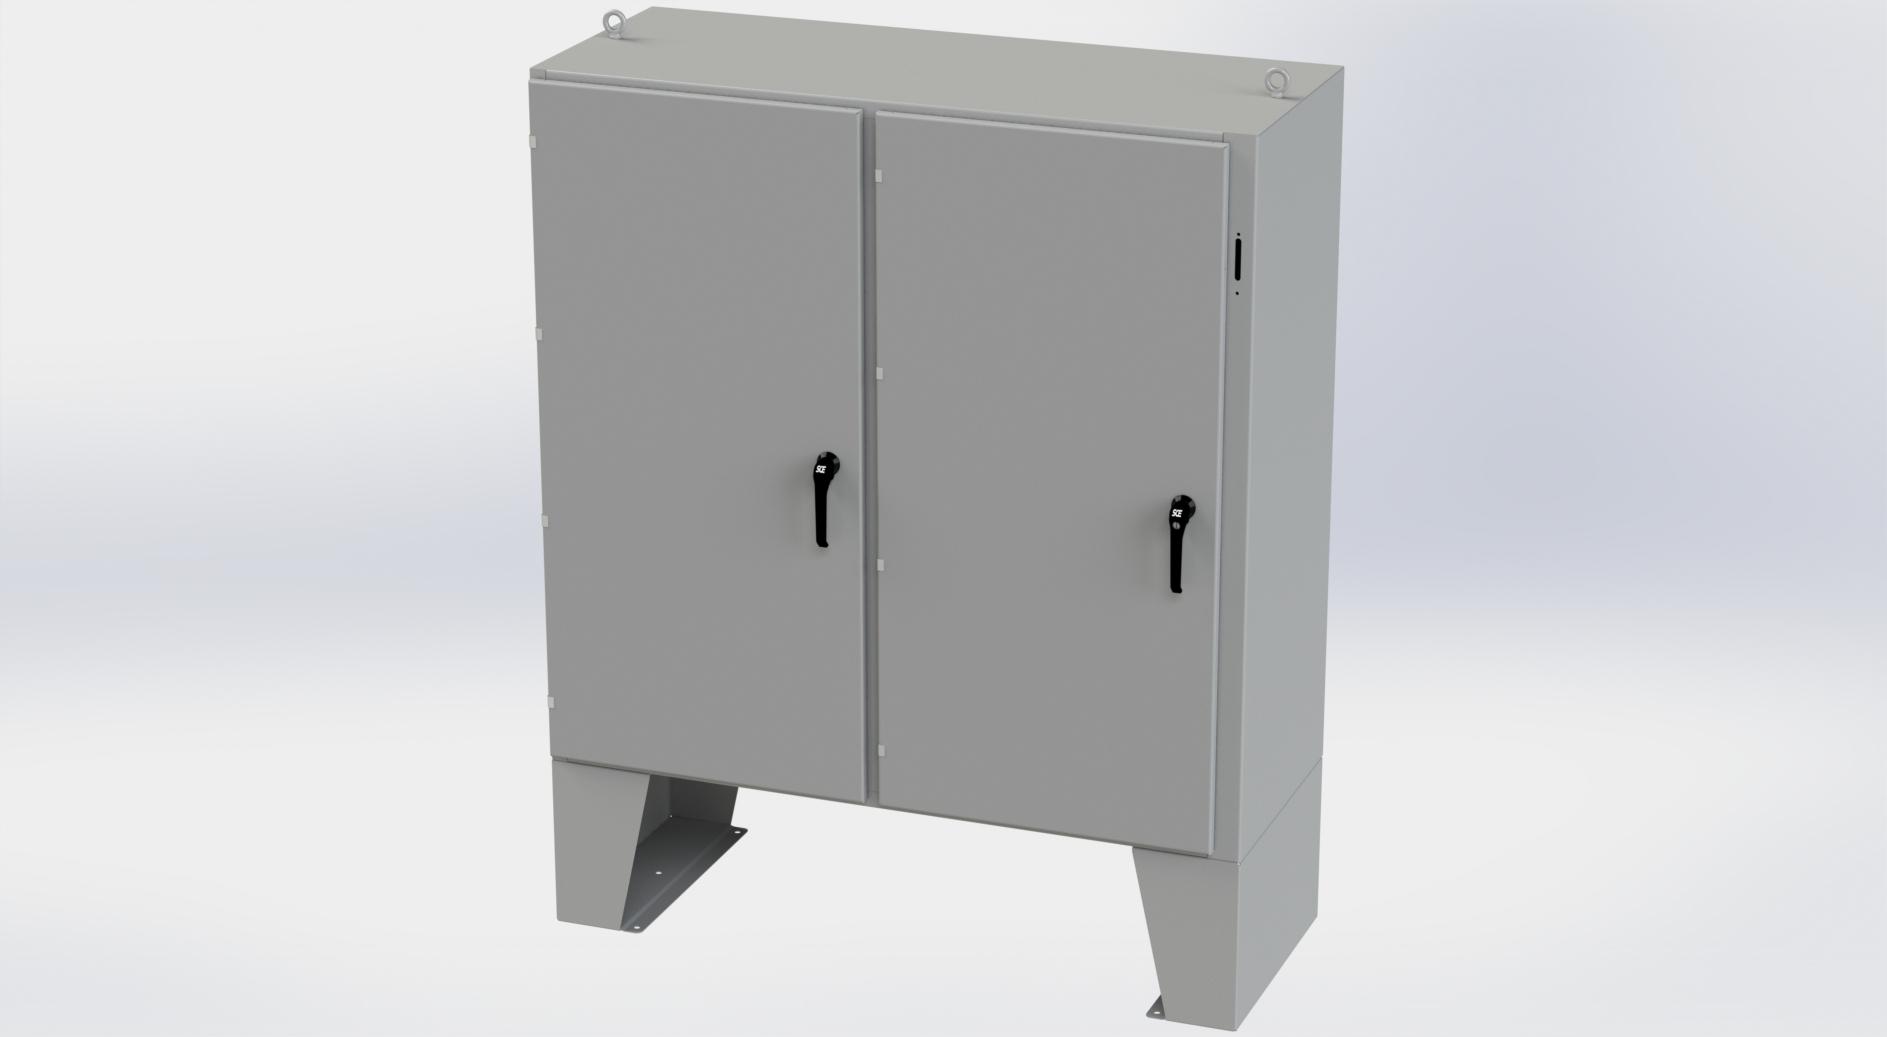 Saginaw Control SCE-60XEL6124LP 2DR XEL Enclosure, Height:60.00", Width:61.00", Depth:24.00", ANSI-61 gray powder coating inside and out. Optional sub-panels are powder coated white.